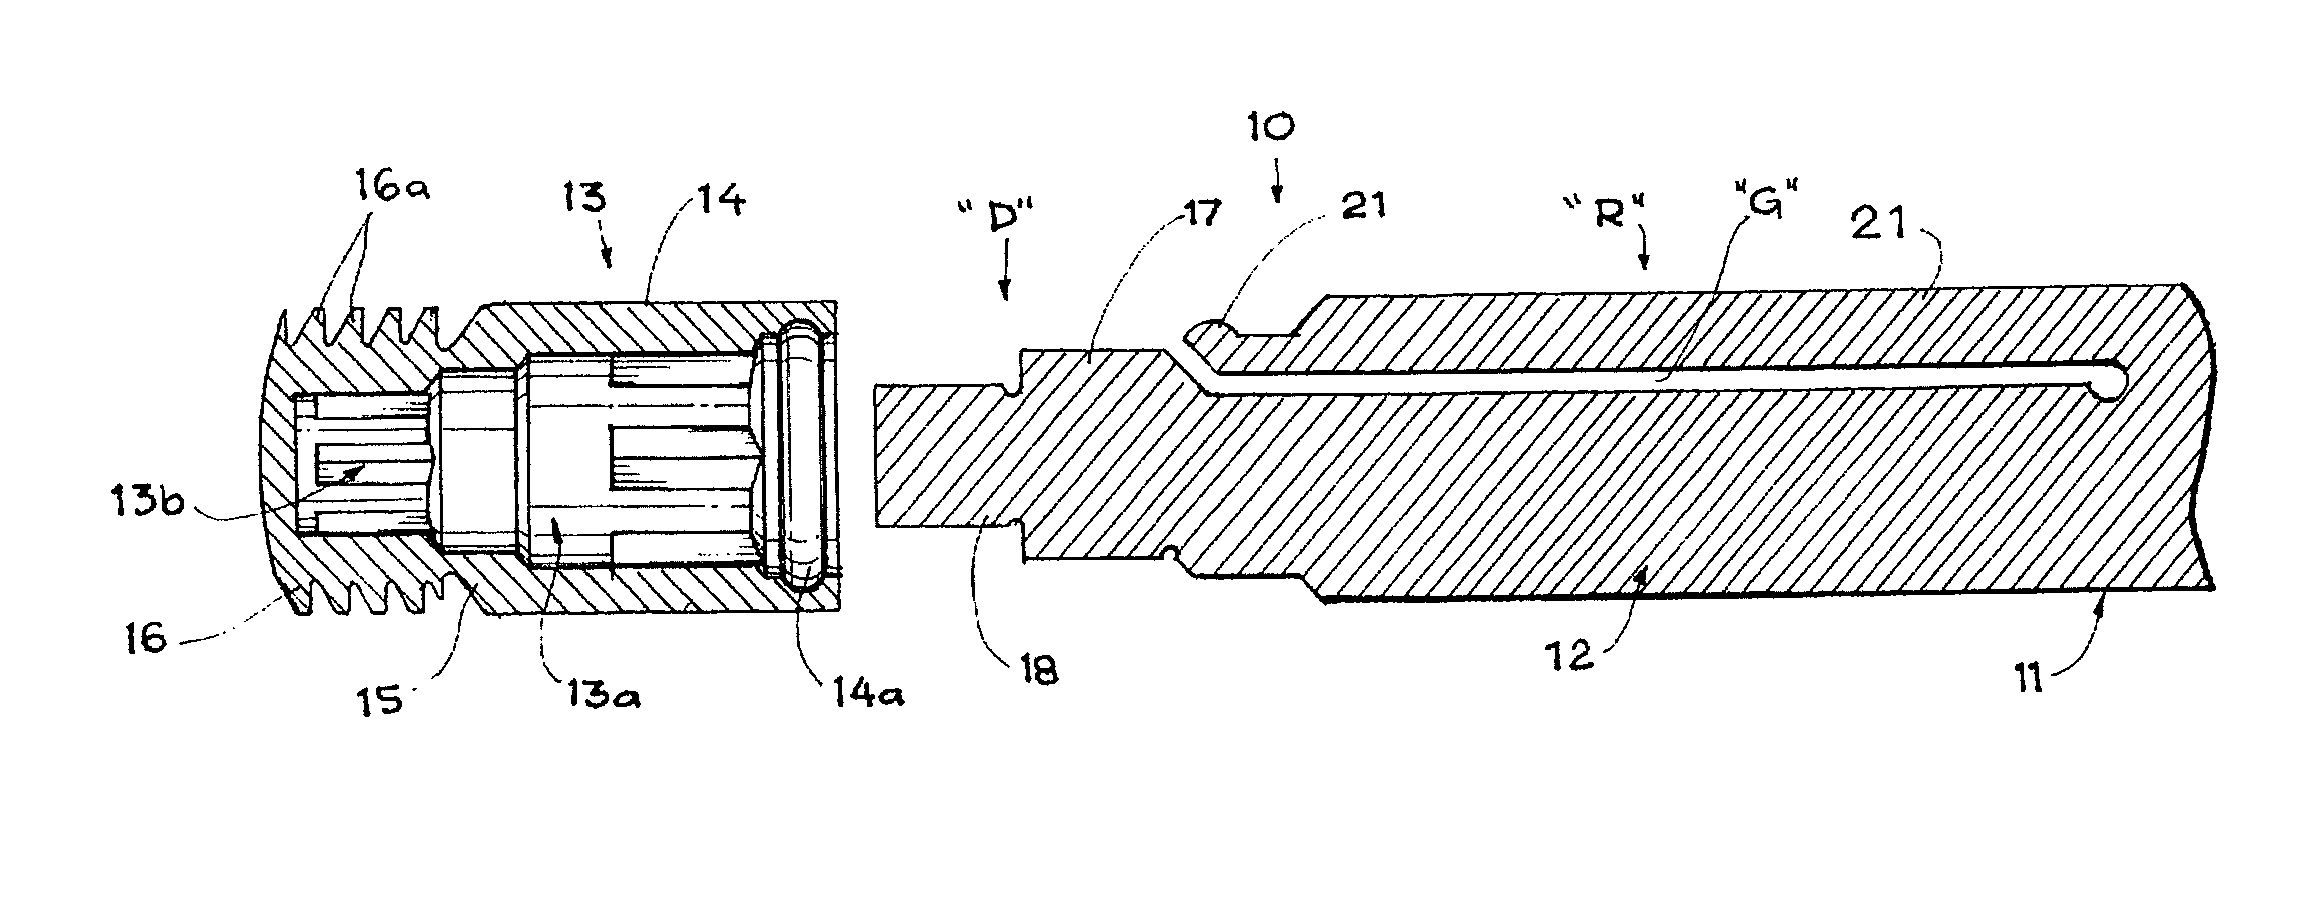 Tool and set screw for use in spinal implant systems